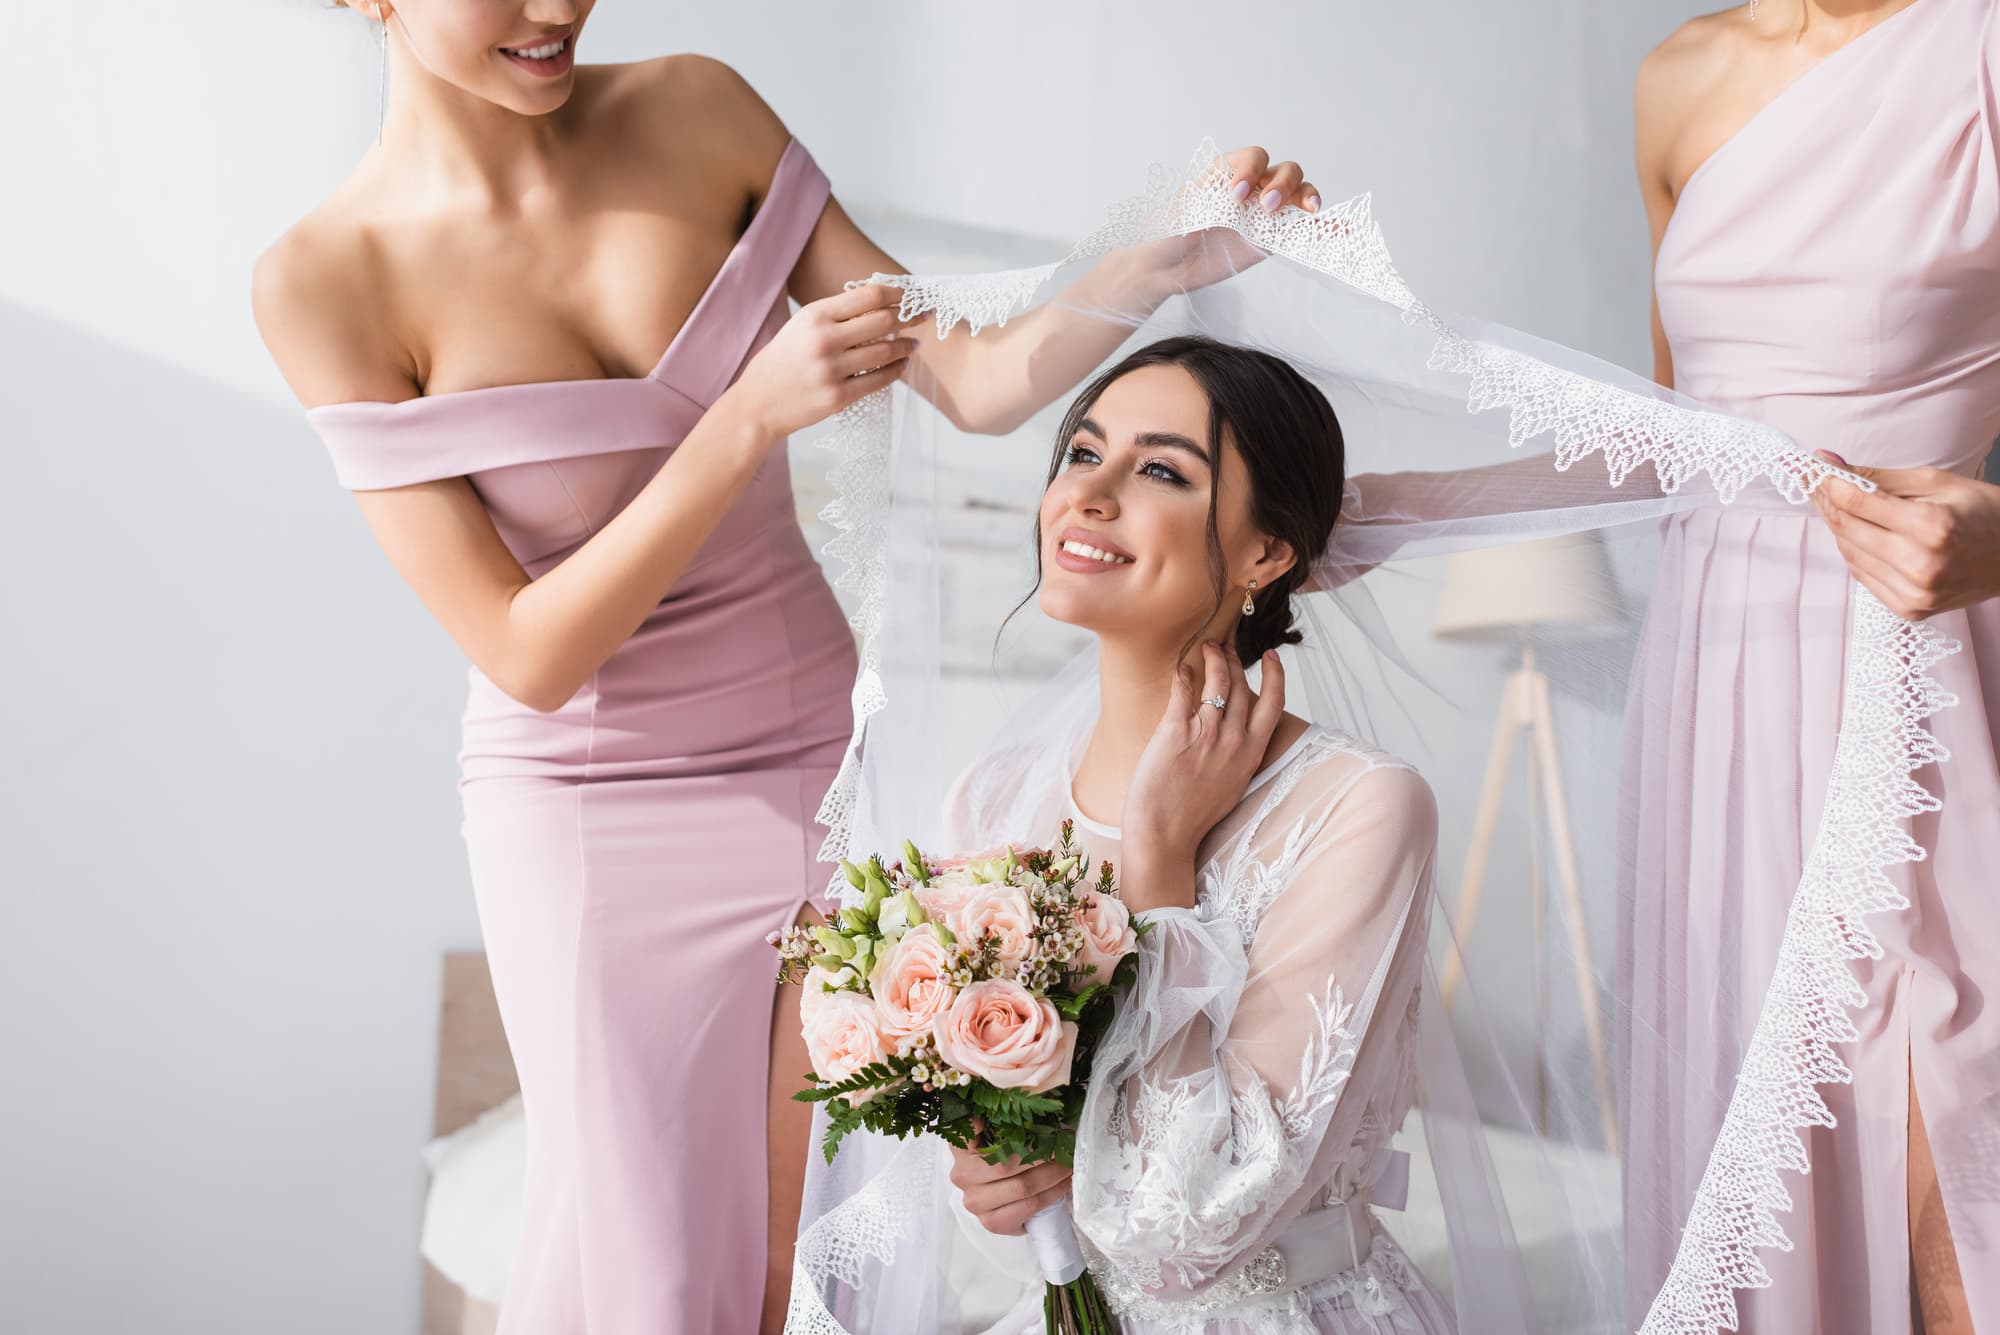 The Ultimate Bridal Veil Guide